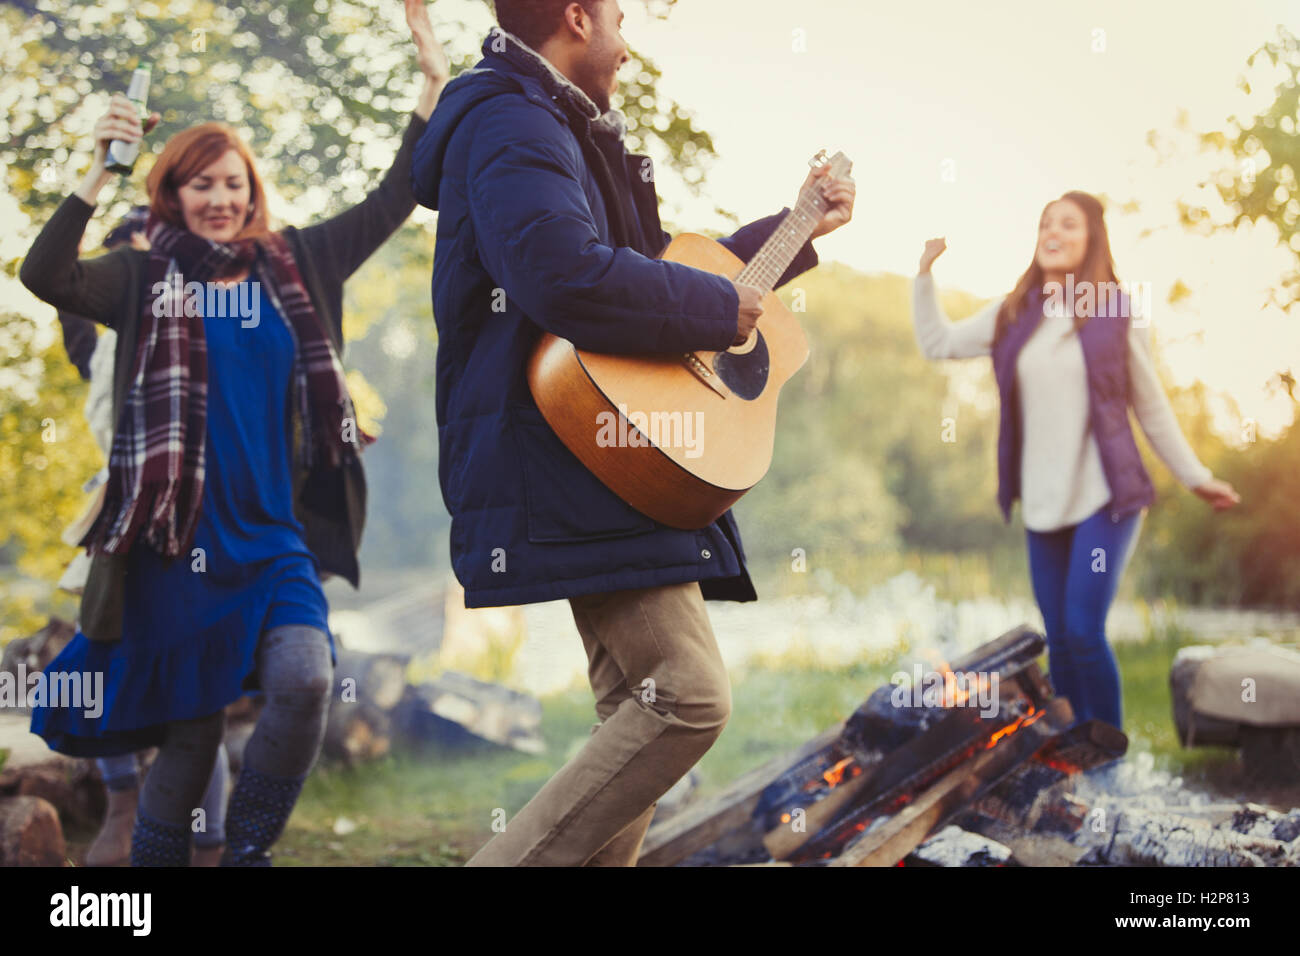 Friends dancing and playing guitar around campfire Stock Photo